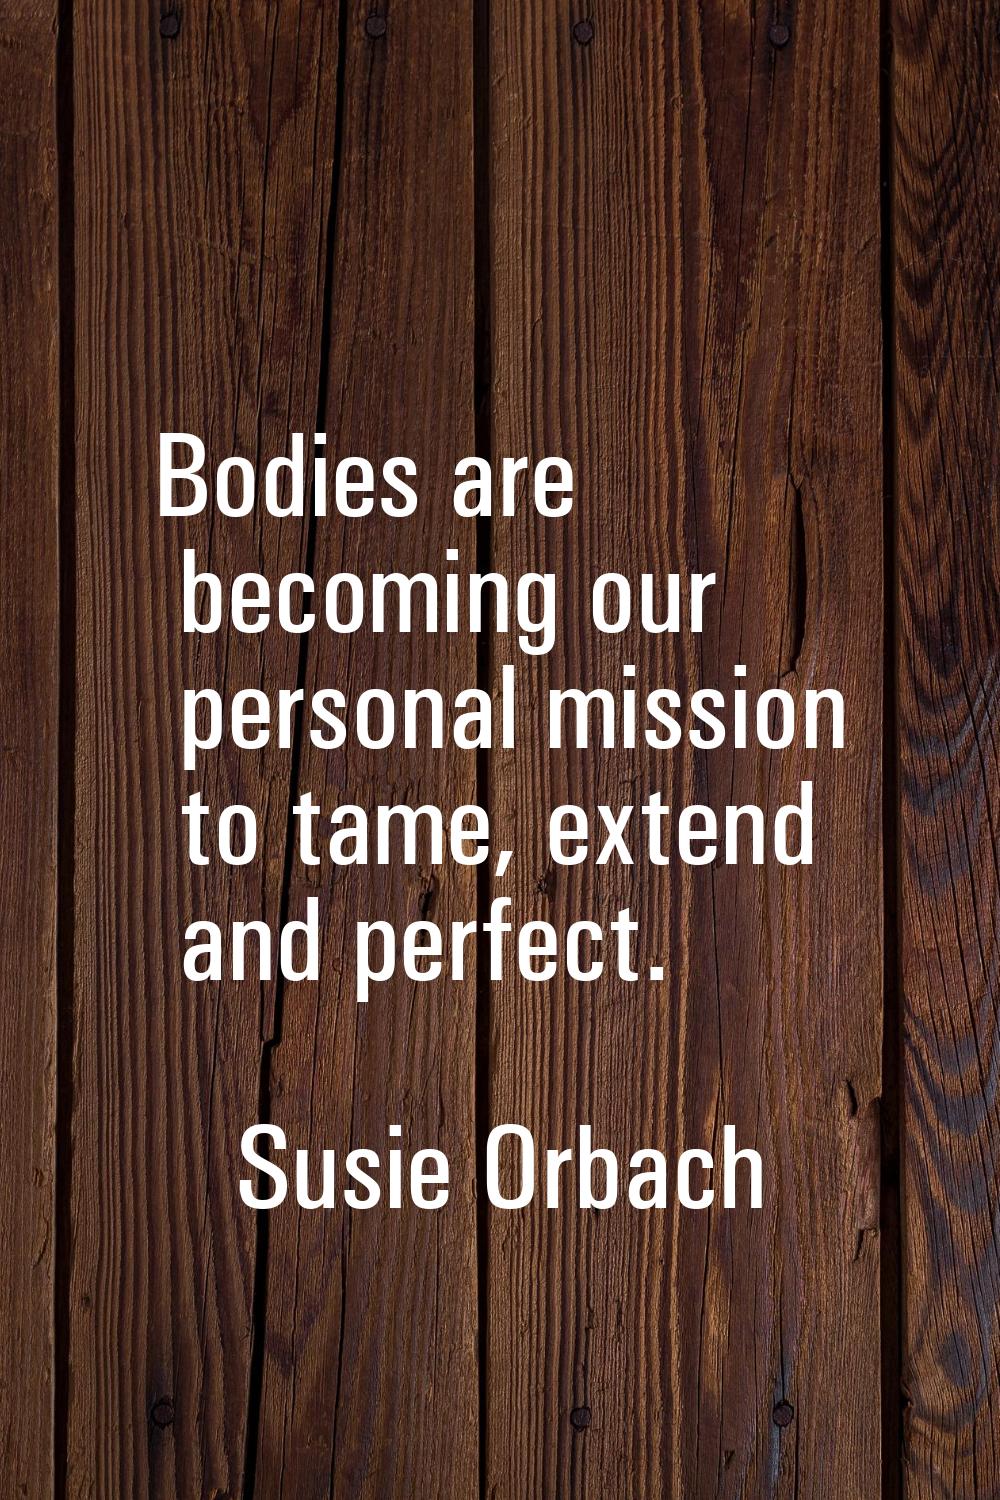 Bodies are becoming our personal mission to tame, extend and perfect.